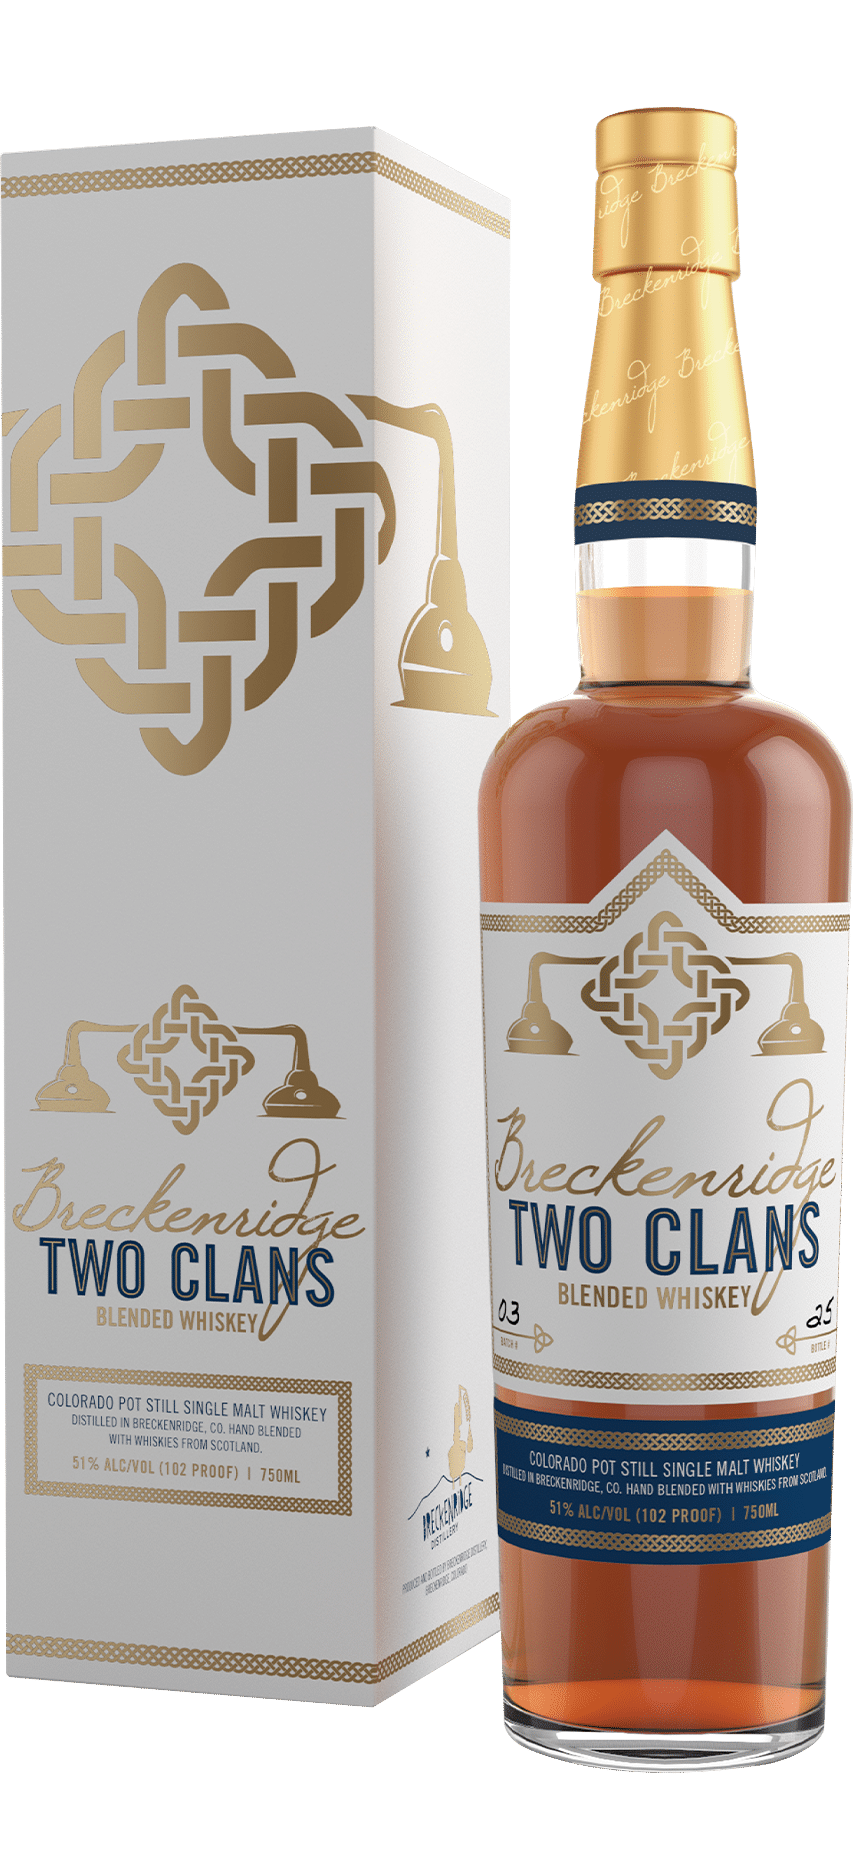 Breckenridge Two Clans blended whiskey bottle with box